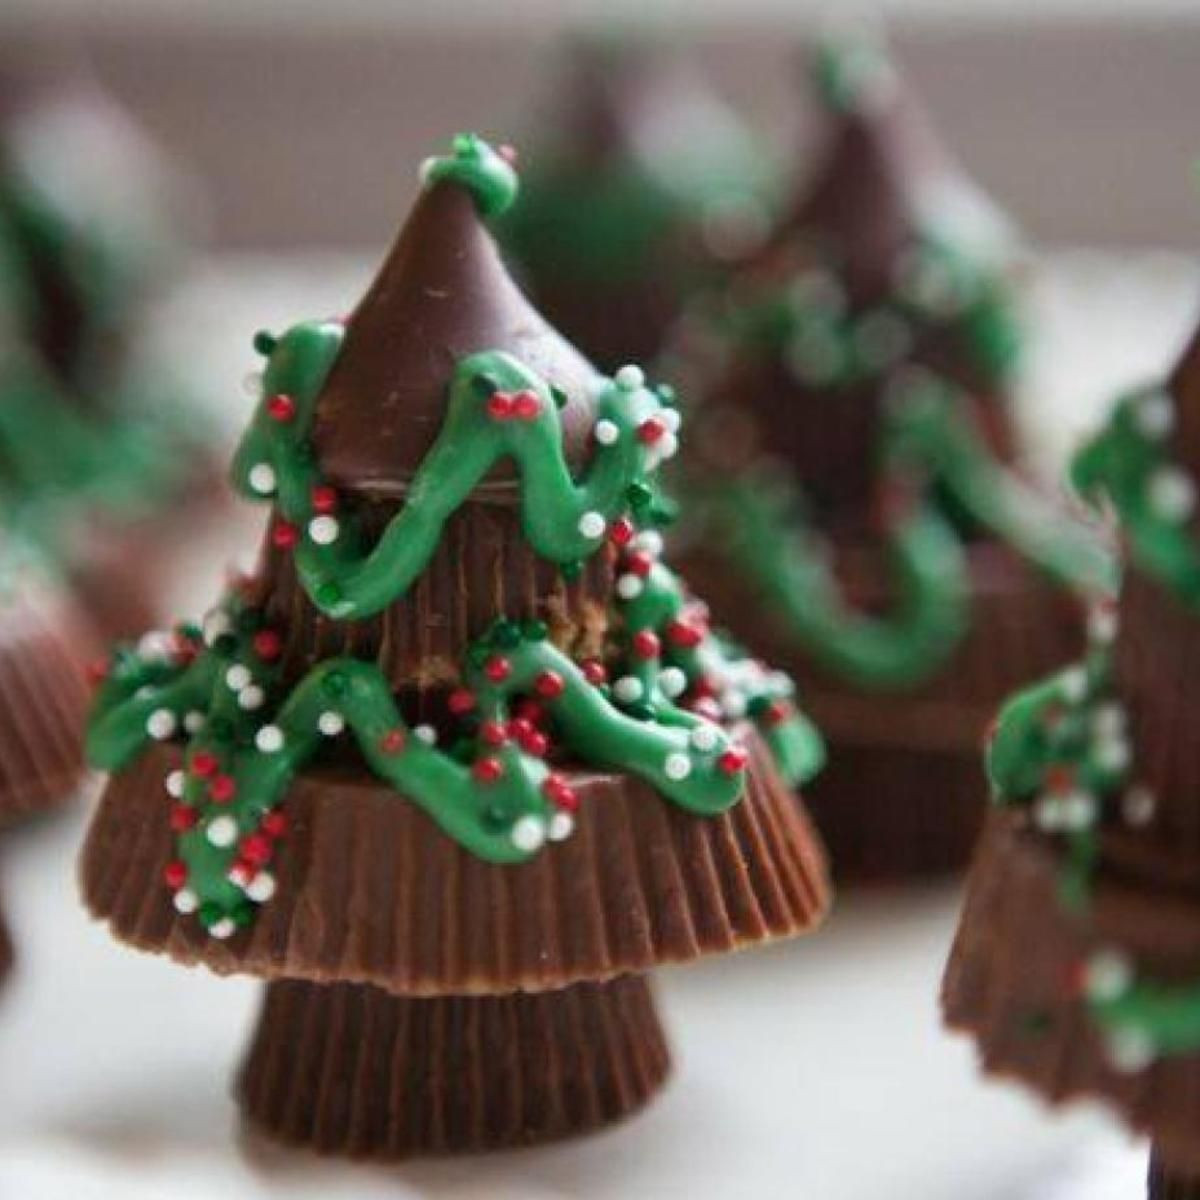 Reeses Christmas Tree Candy
 Reese s Chocolate Candy Christmas Trees Recipe